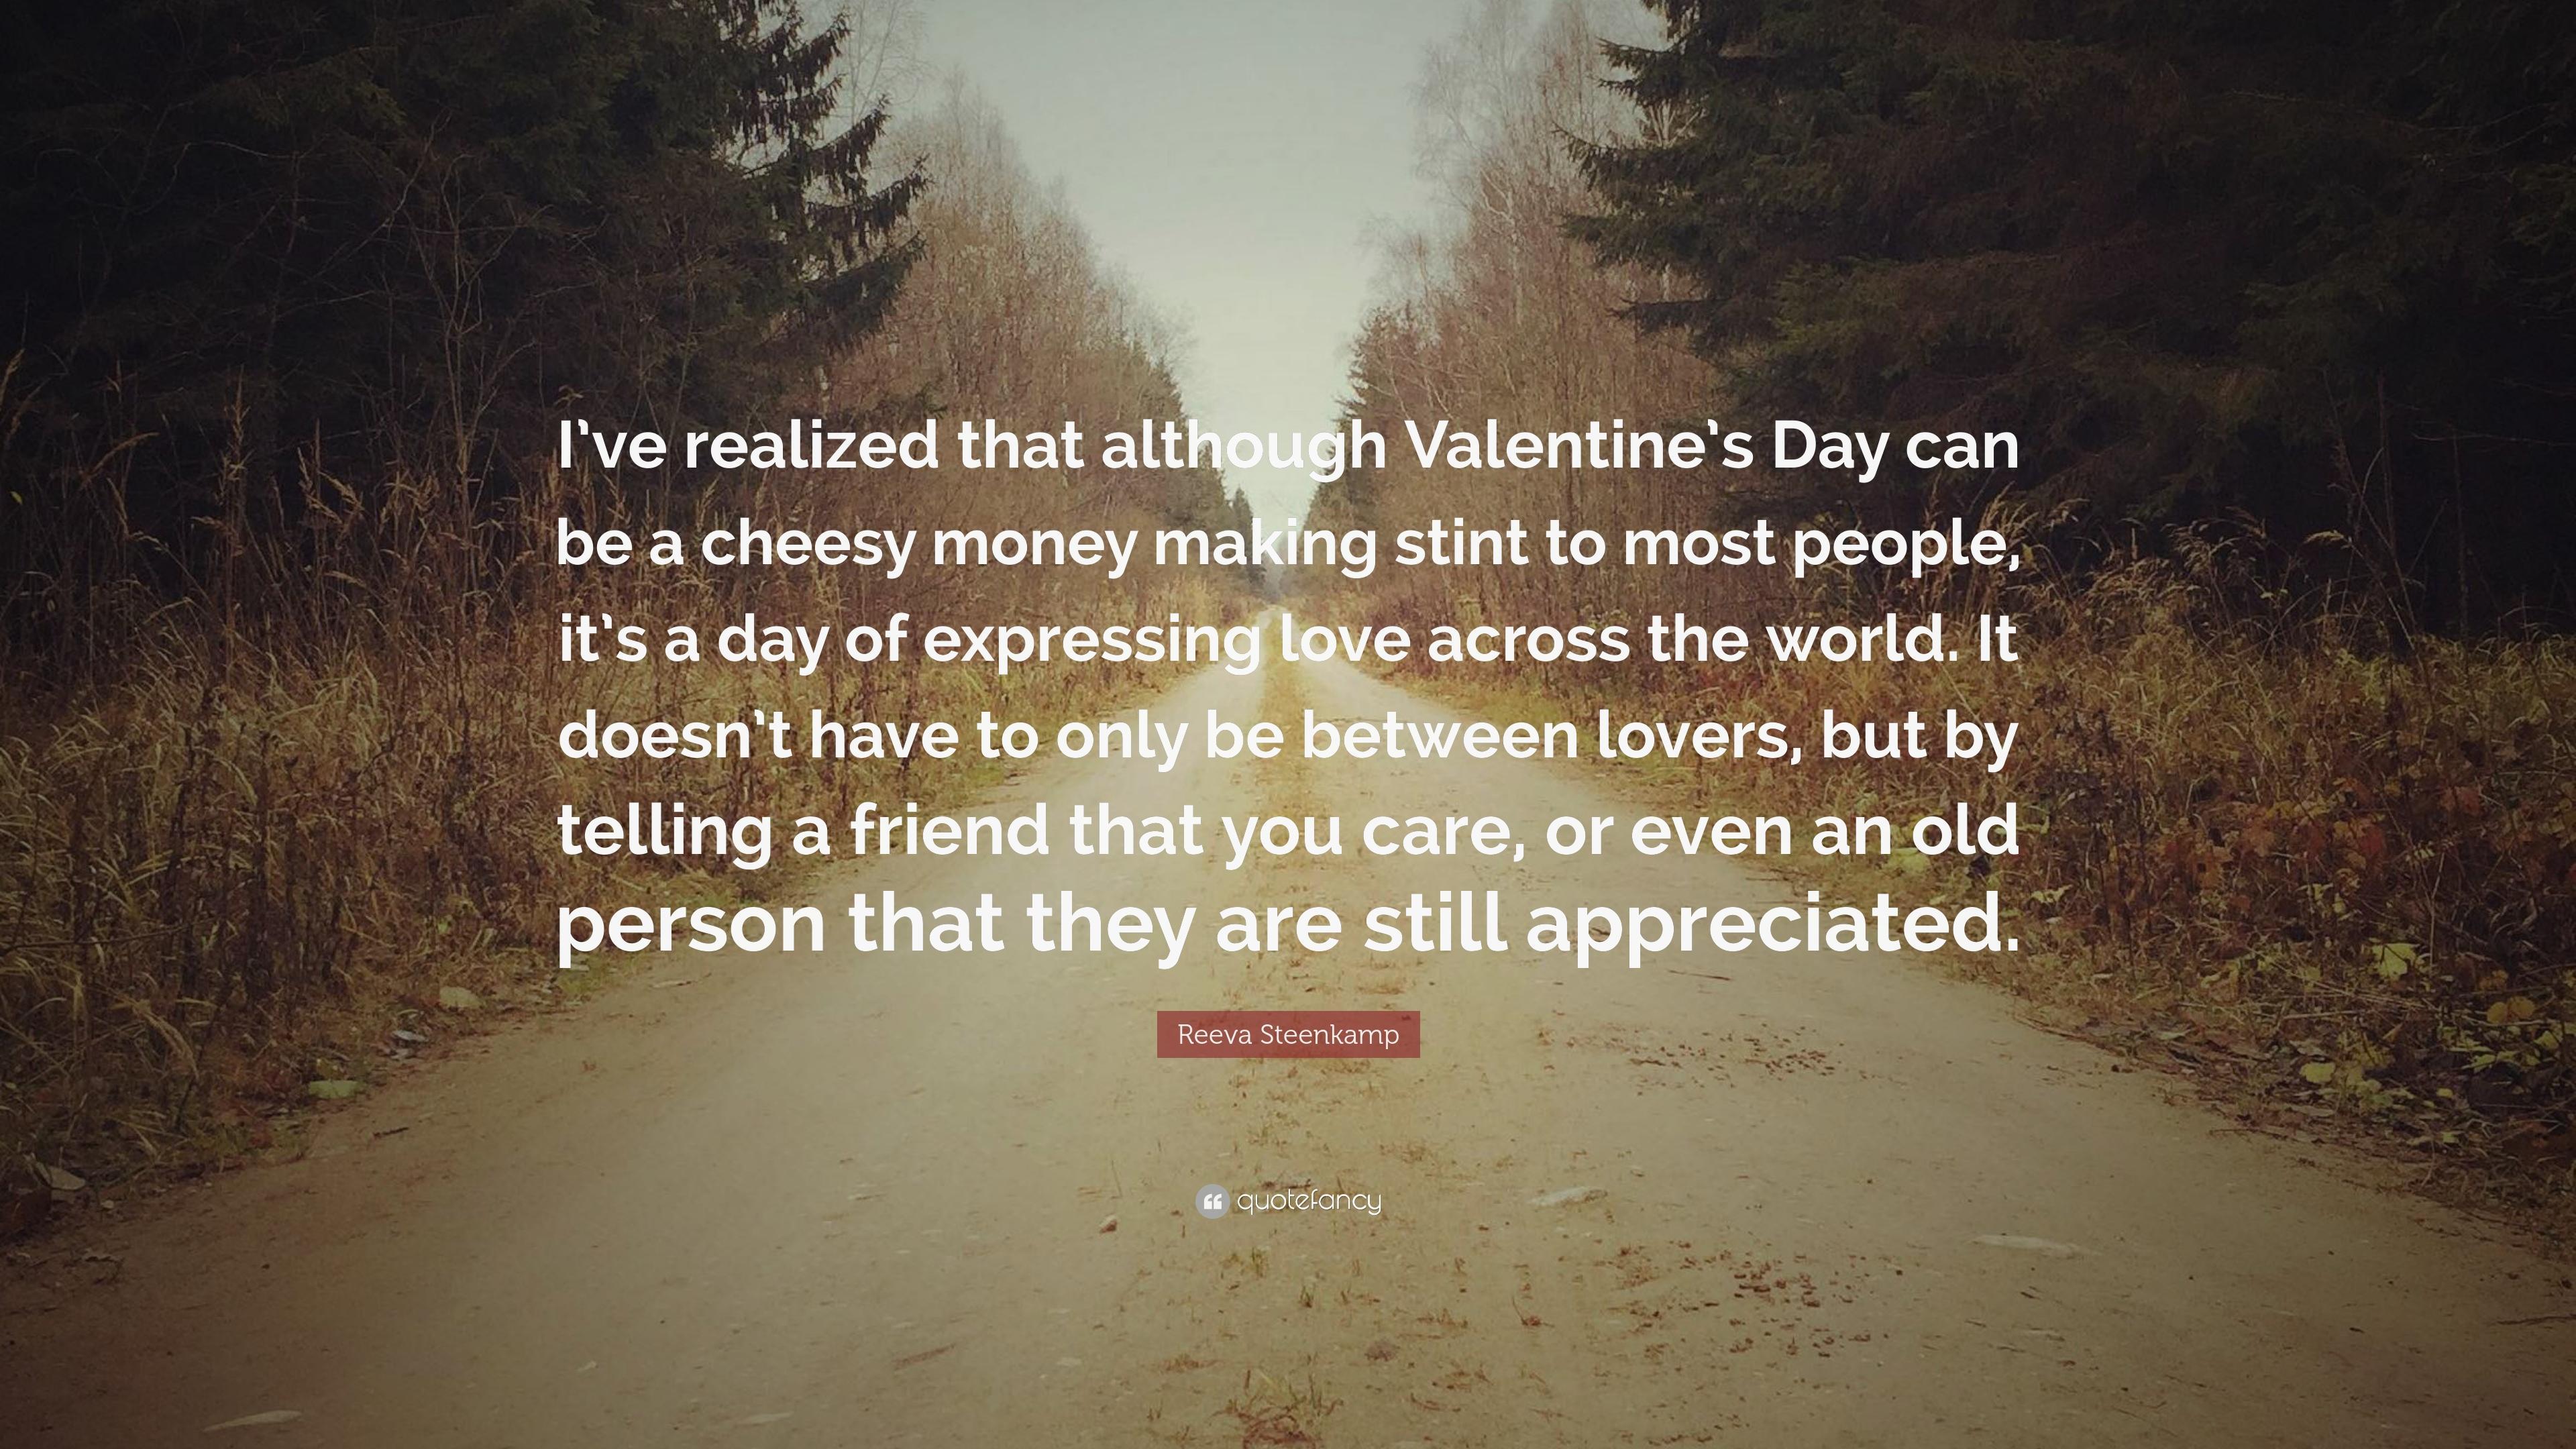 Reeva Steenkamp Quote: “I've realized that although Valentine's